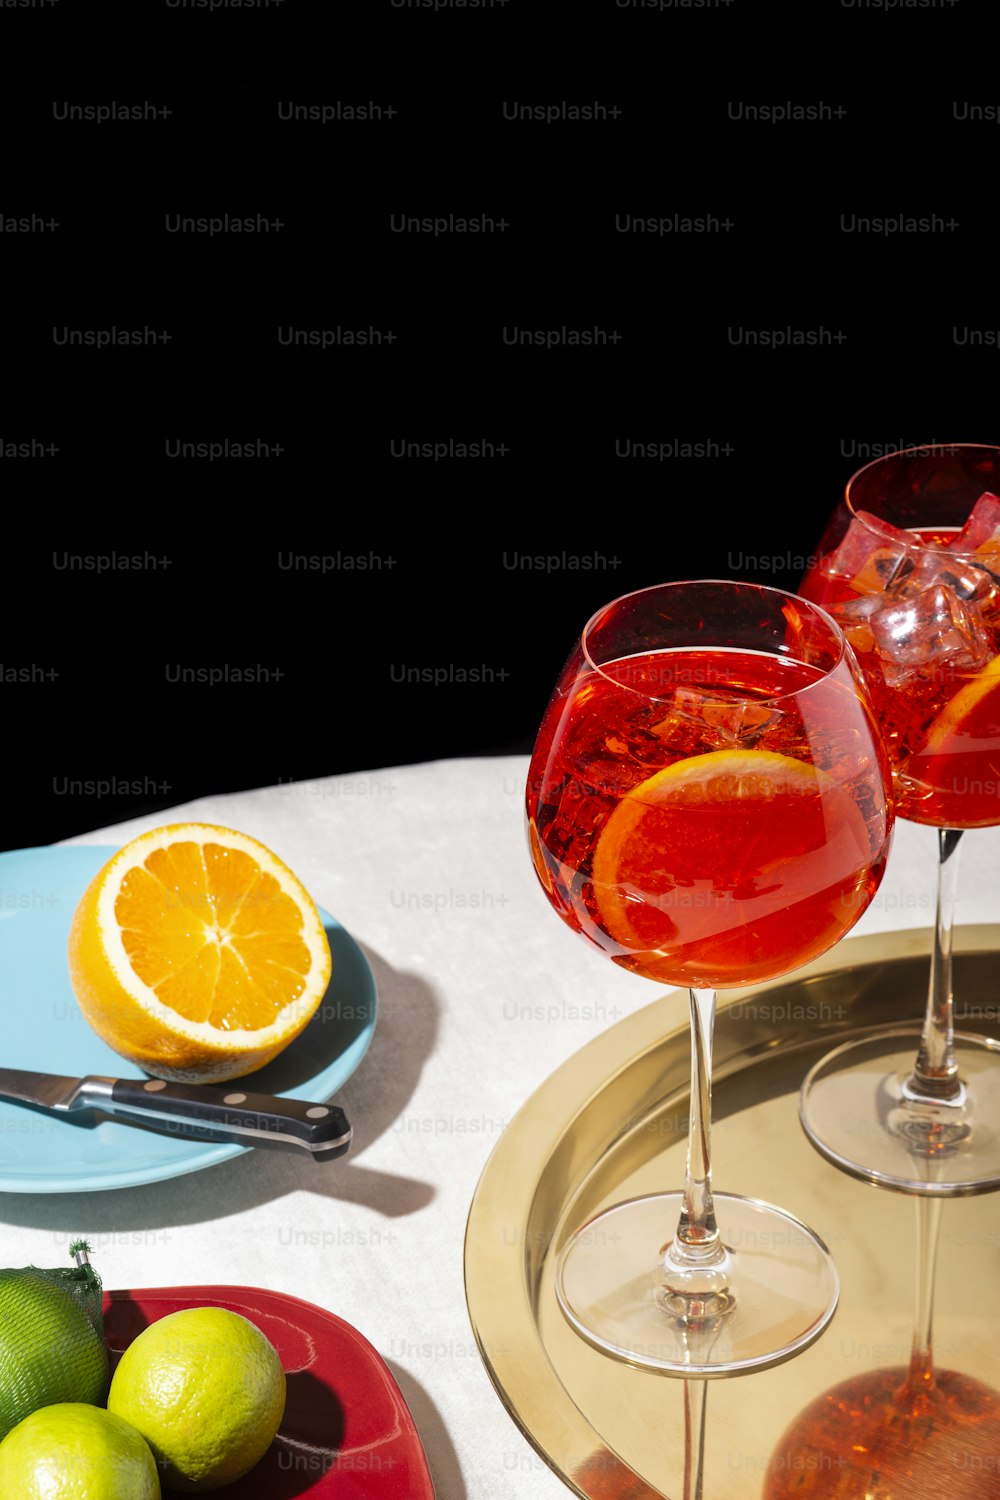 Spritz veneziano, an IBA cocktail with Prosecco or white sparkling wine, bitter, soda, ice and a slice of orange, in a calix on a table, pop graphic style